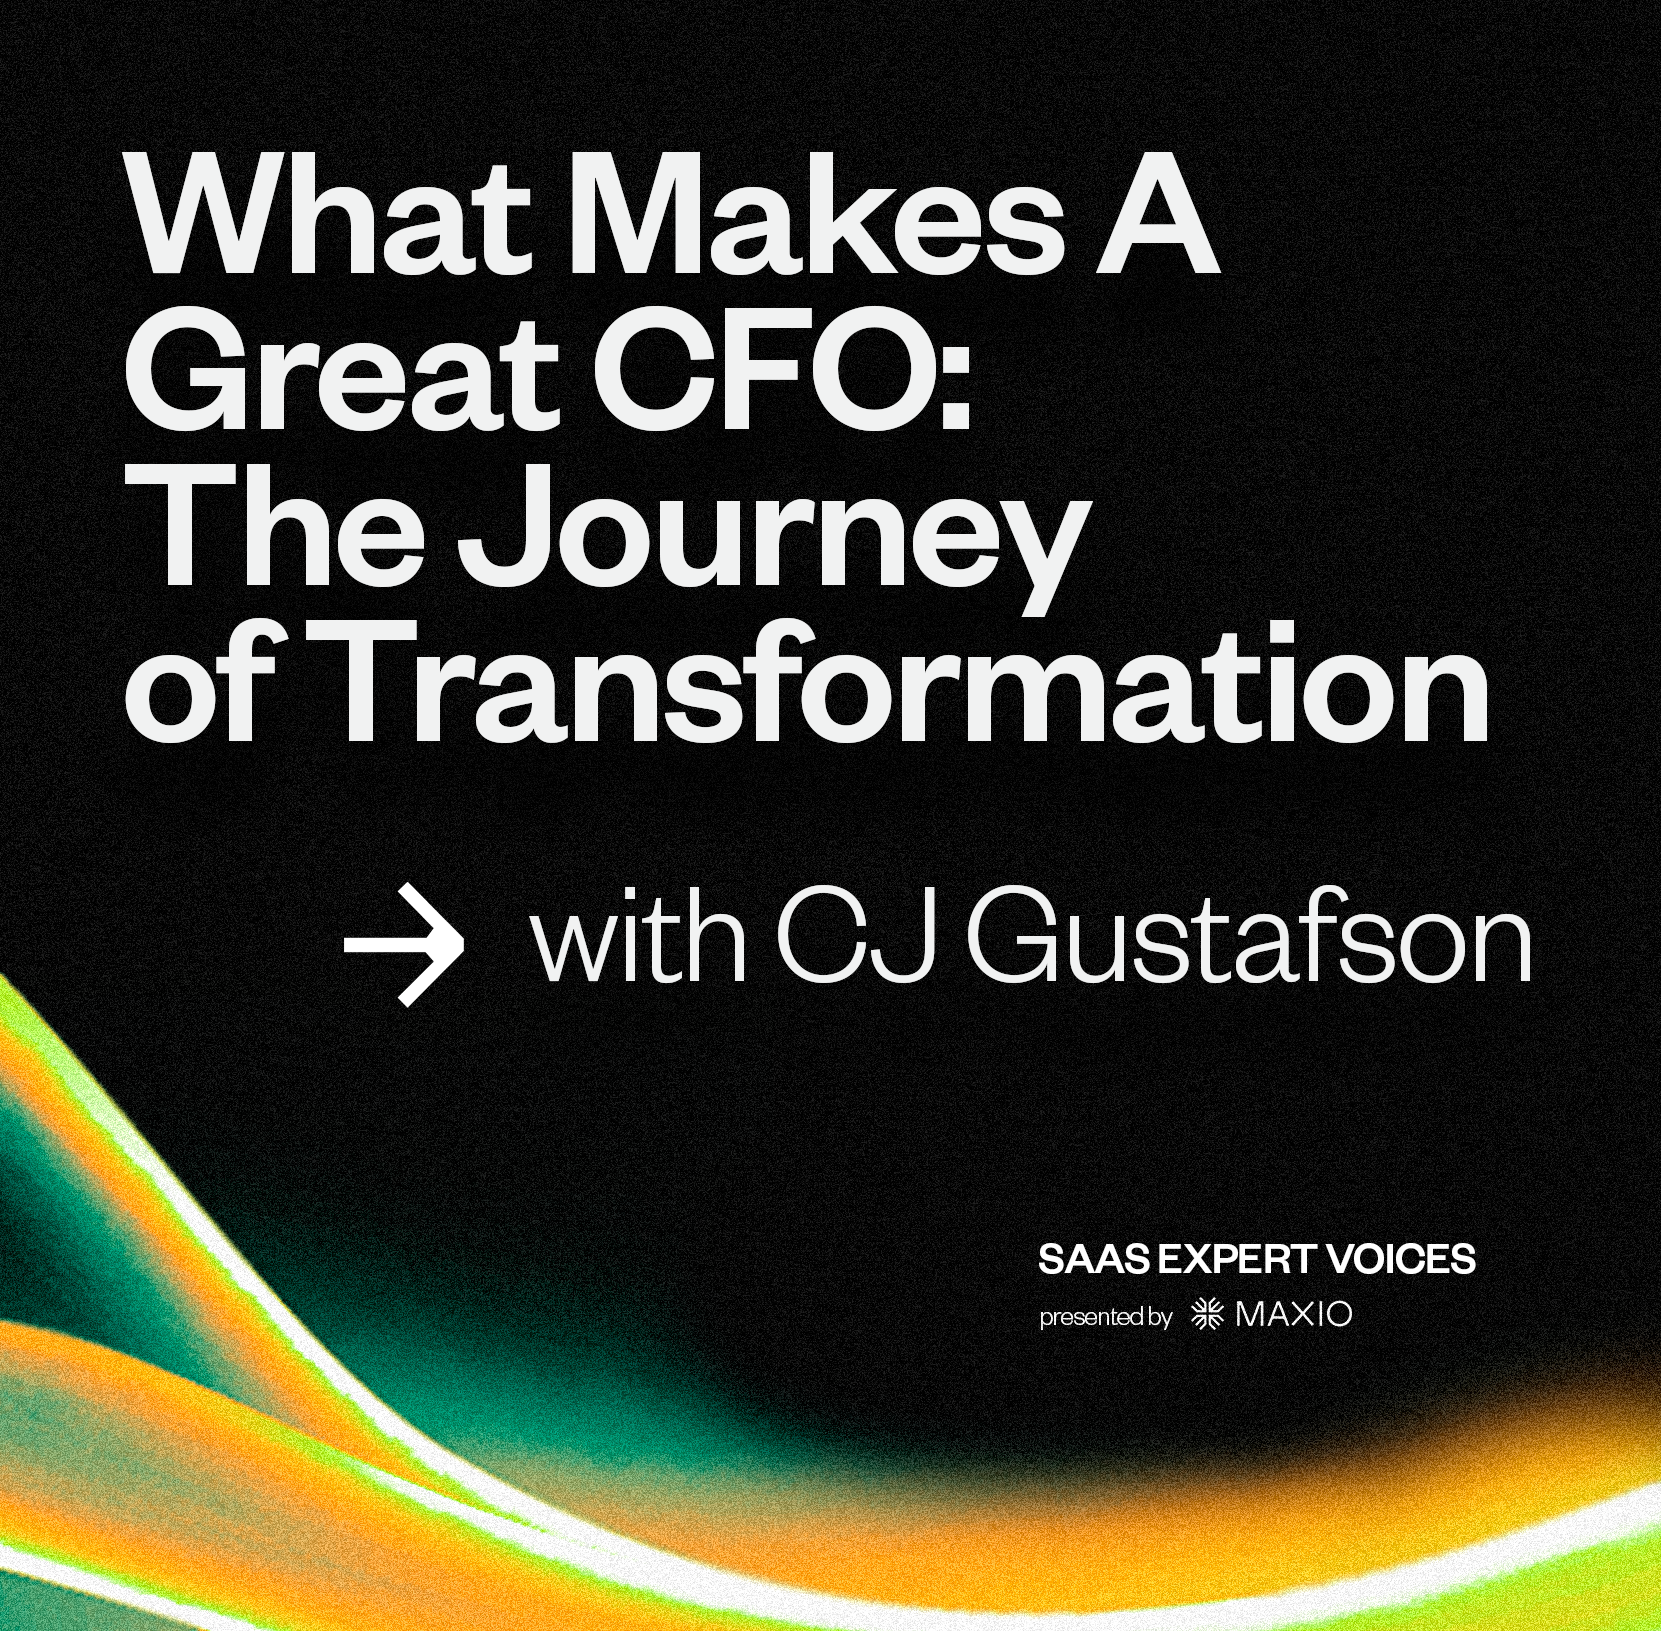 This week on the Expert Voices podcast, Randy Wootton, CEO of Maxio, speaks with CJ Gustafson, CFO, and writer behind Mostly Metrics, to discuss the CFO's transformation from a back-office statistician to a front-office strategist, the evolving landscape of SaaS, and the future of finance leadership. Randy and CJ discuss the qualities that distinguish outstanding CFOs, the integration of strategic planning with finance, and the powerful impact of technology on the CFO's role. Listen as CJ shares how CFOs are leveraging technology to streamline processes, enhance decision-making, and drive company performance while balancing risk in the dynamic SaaS sector.